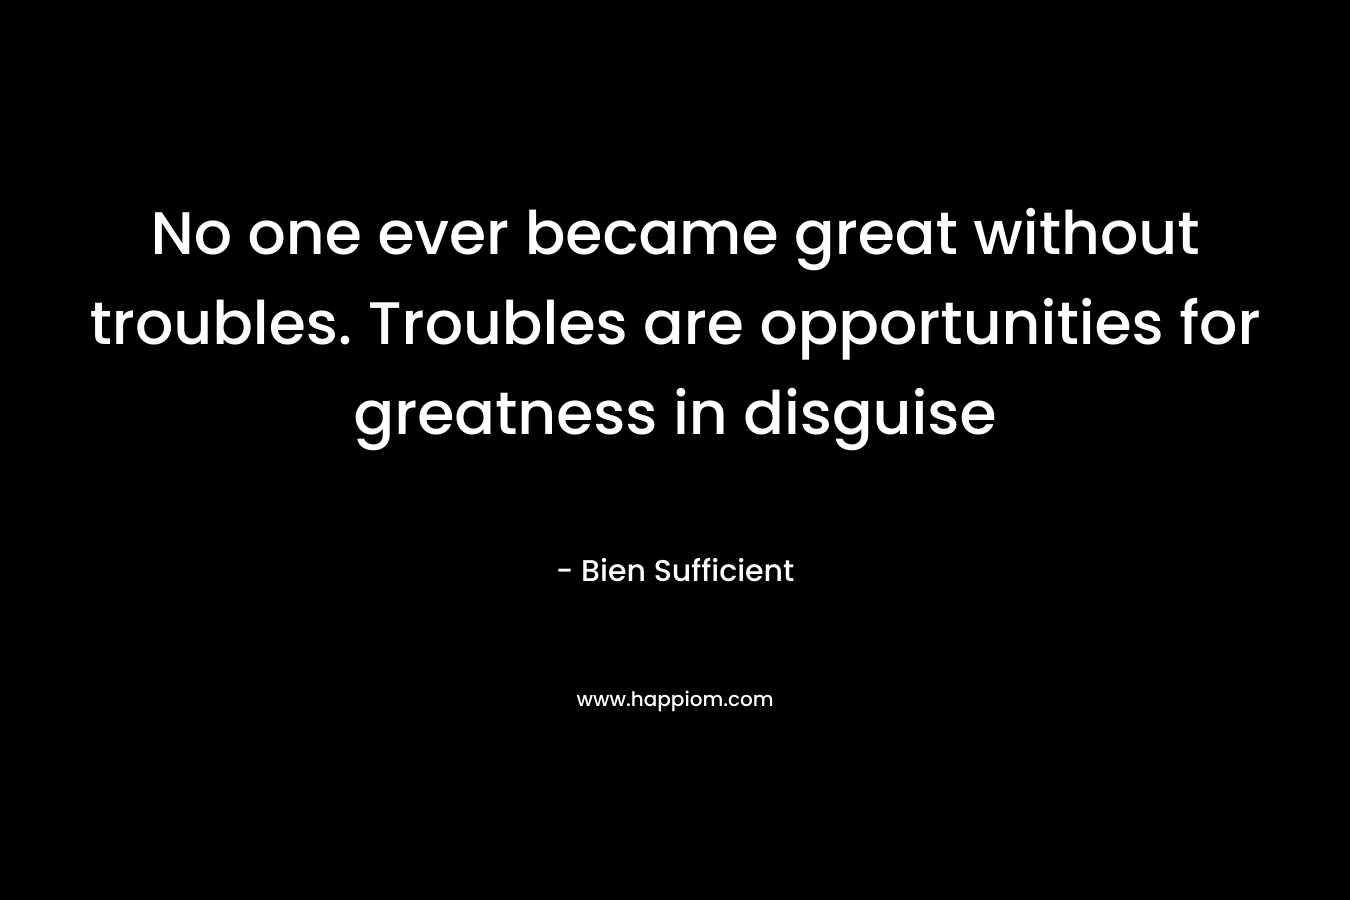 No one ever became great without troubles. Troubles are opportunities for greatness in disguise – Bien Sufficient